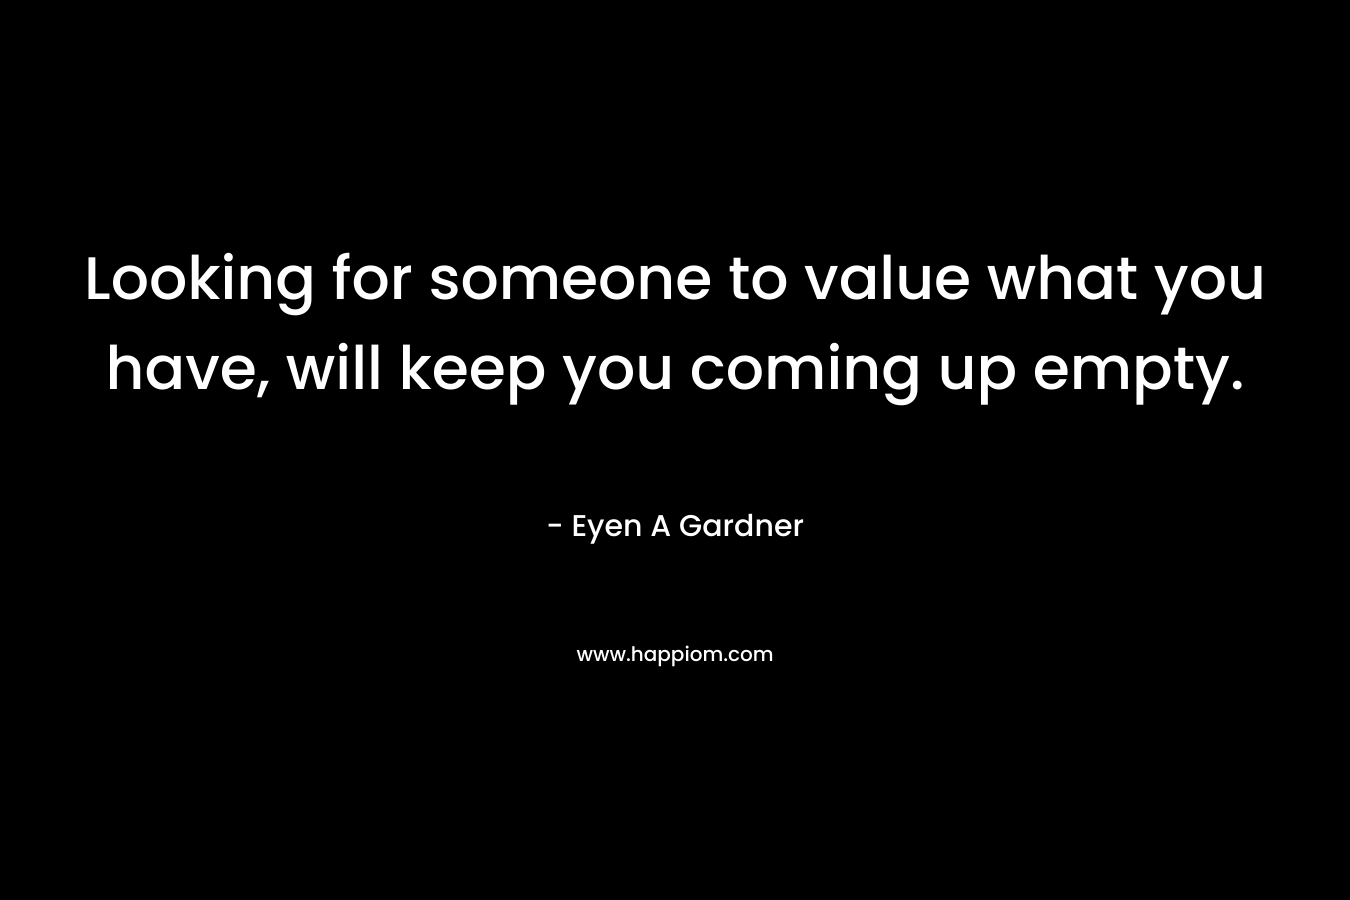 Looking for someone to value what you have, will keep you coming up empty. – Eyen A Gardner